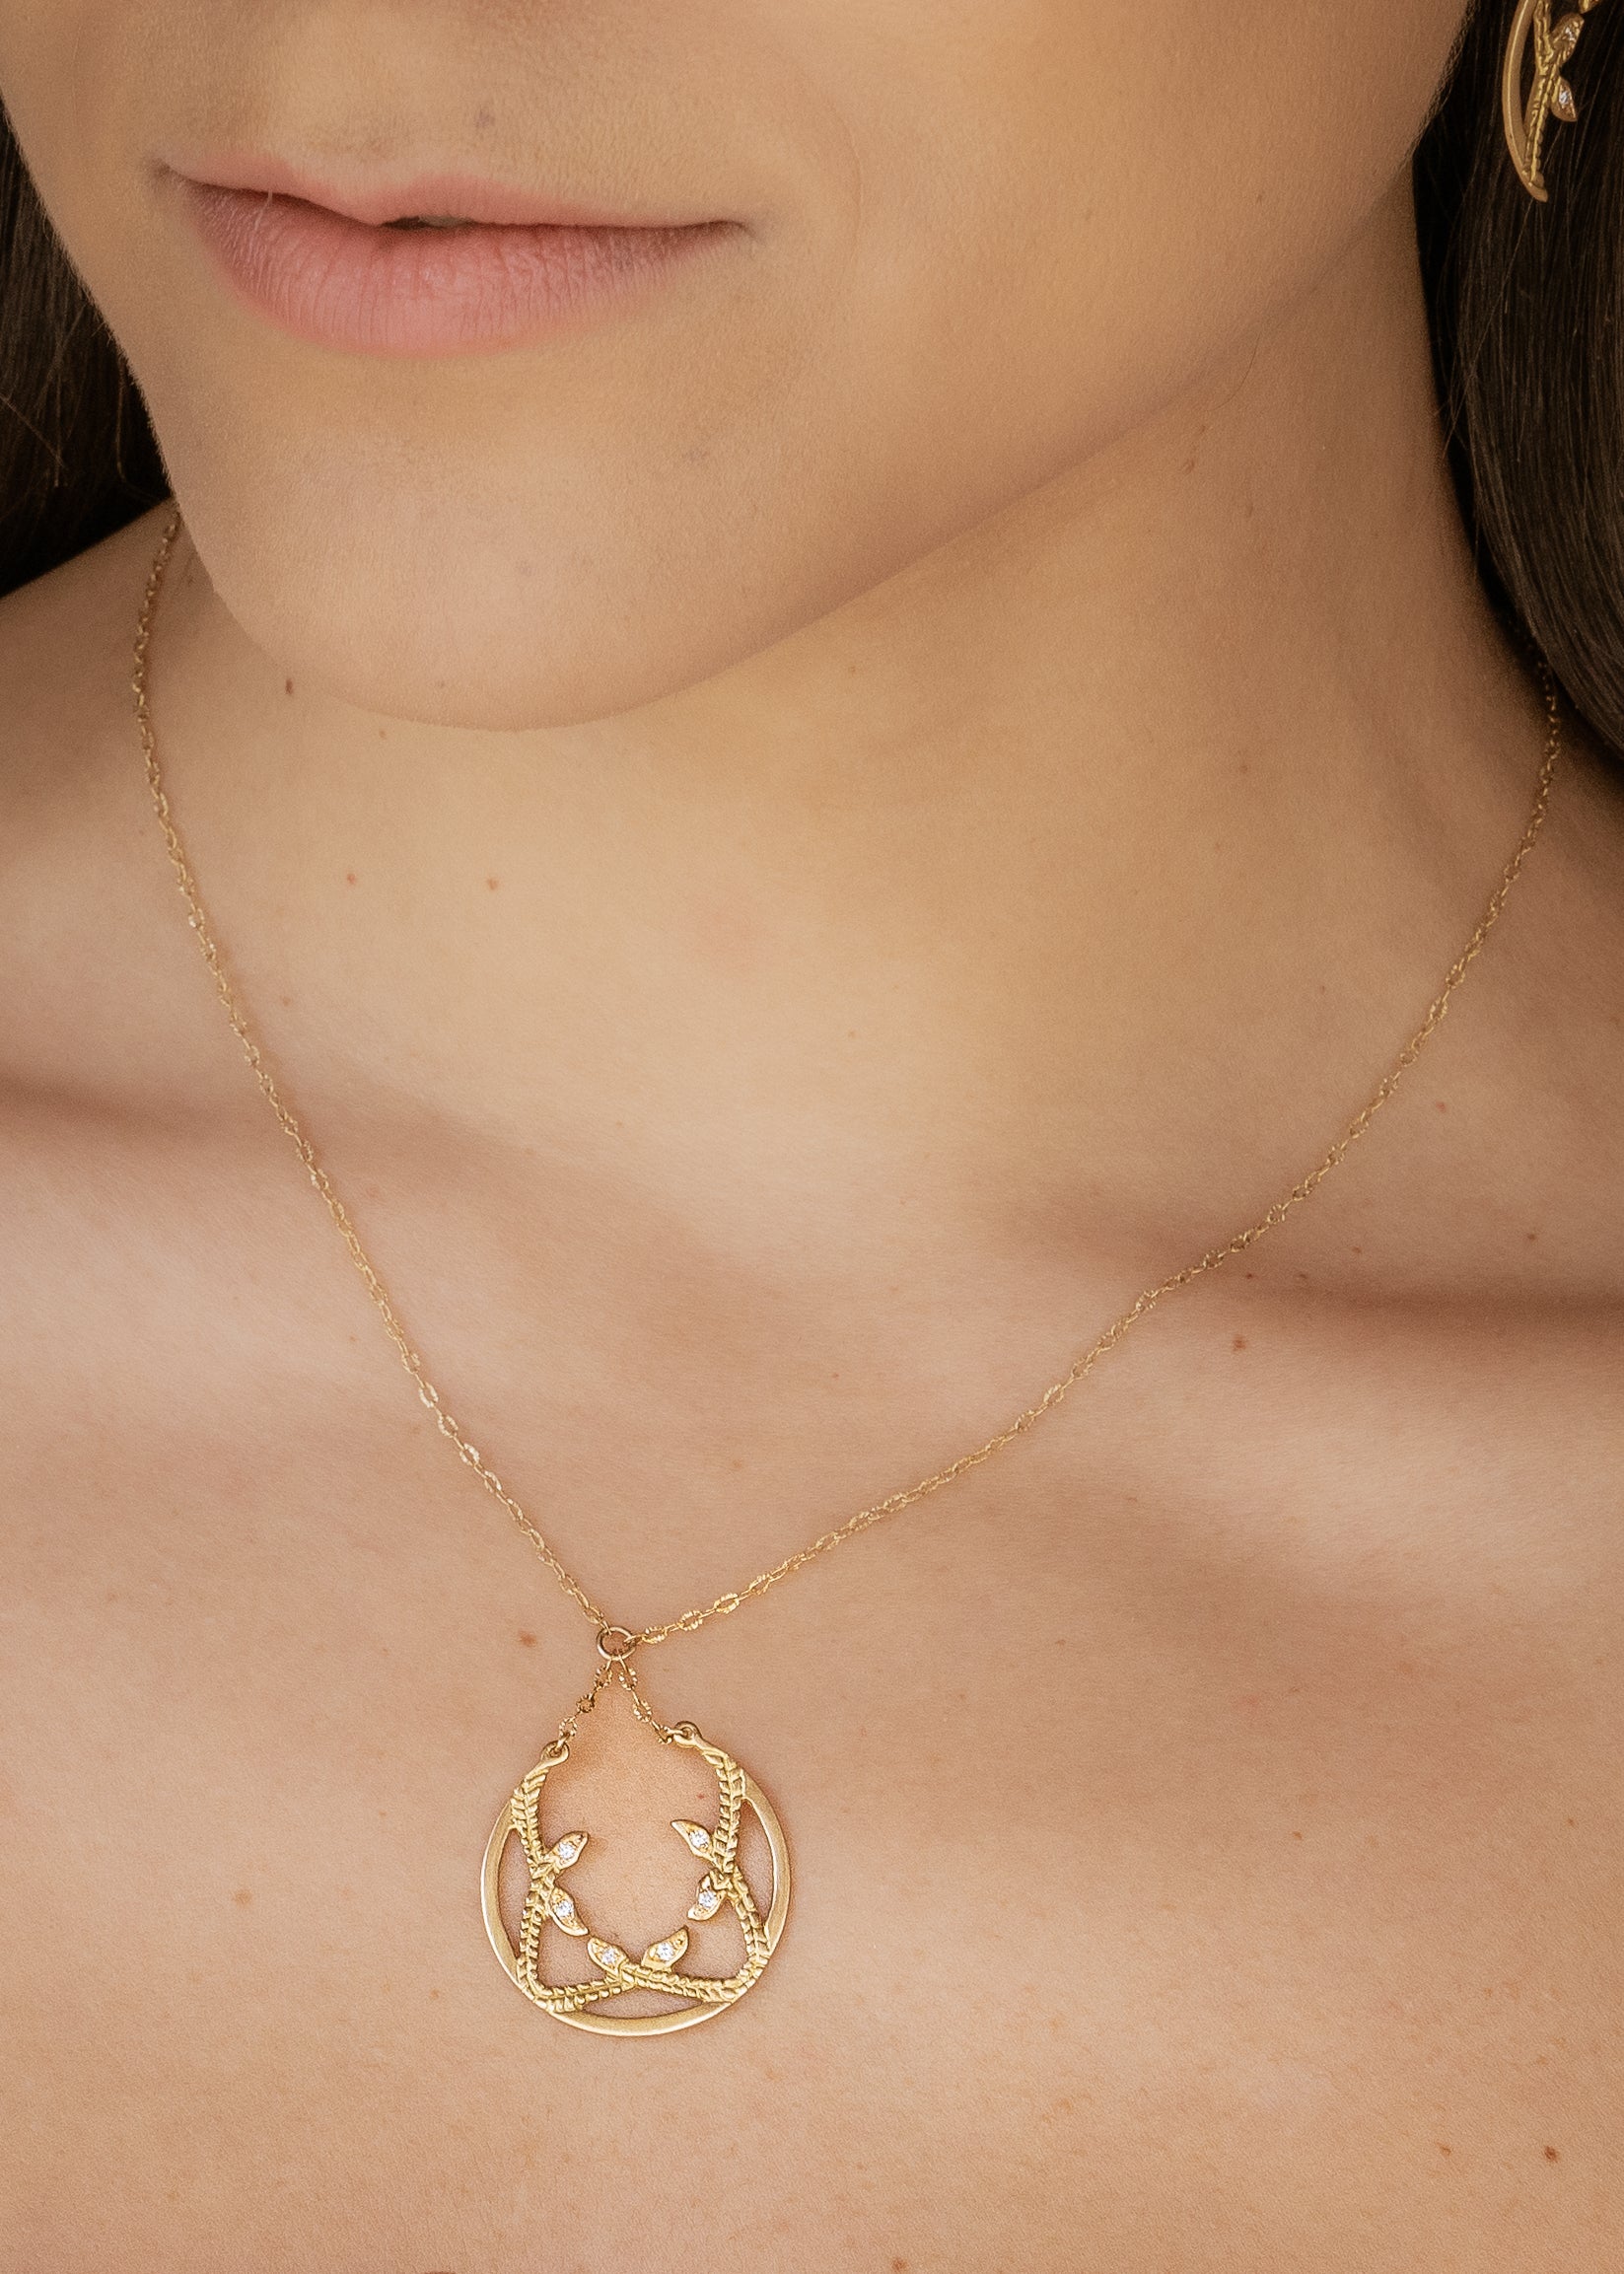 Inspired by the female prophets who share its name, the Sibyl necklace whispers the mysteries of the future while echoing stories of days past. Smooth open-work crescents give way to intertwining textured elements, hand-carved to draw the eye in and reveal brilliant diamond accents—a substantial and haunting design that’s decidedly feminine. 